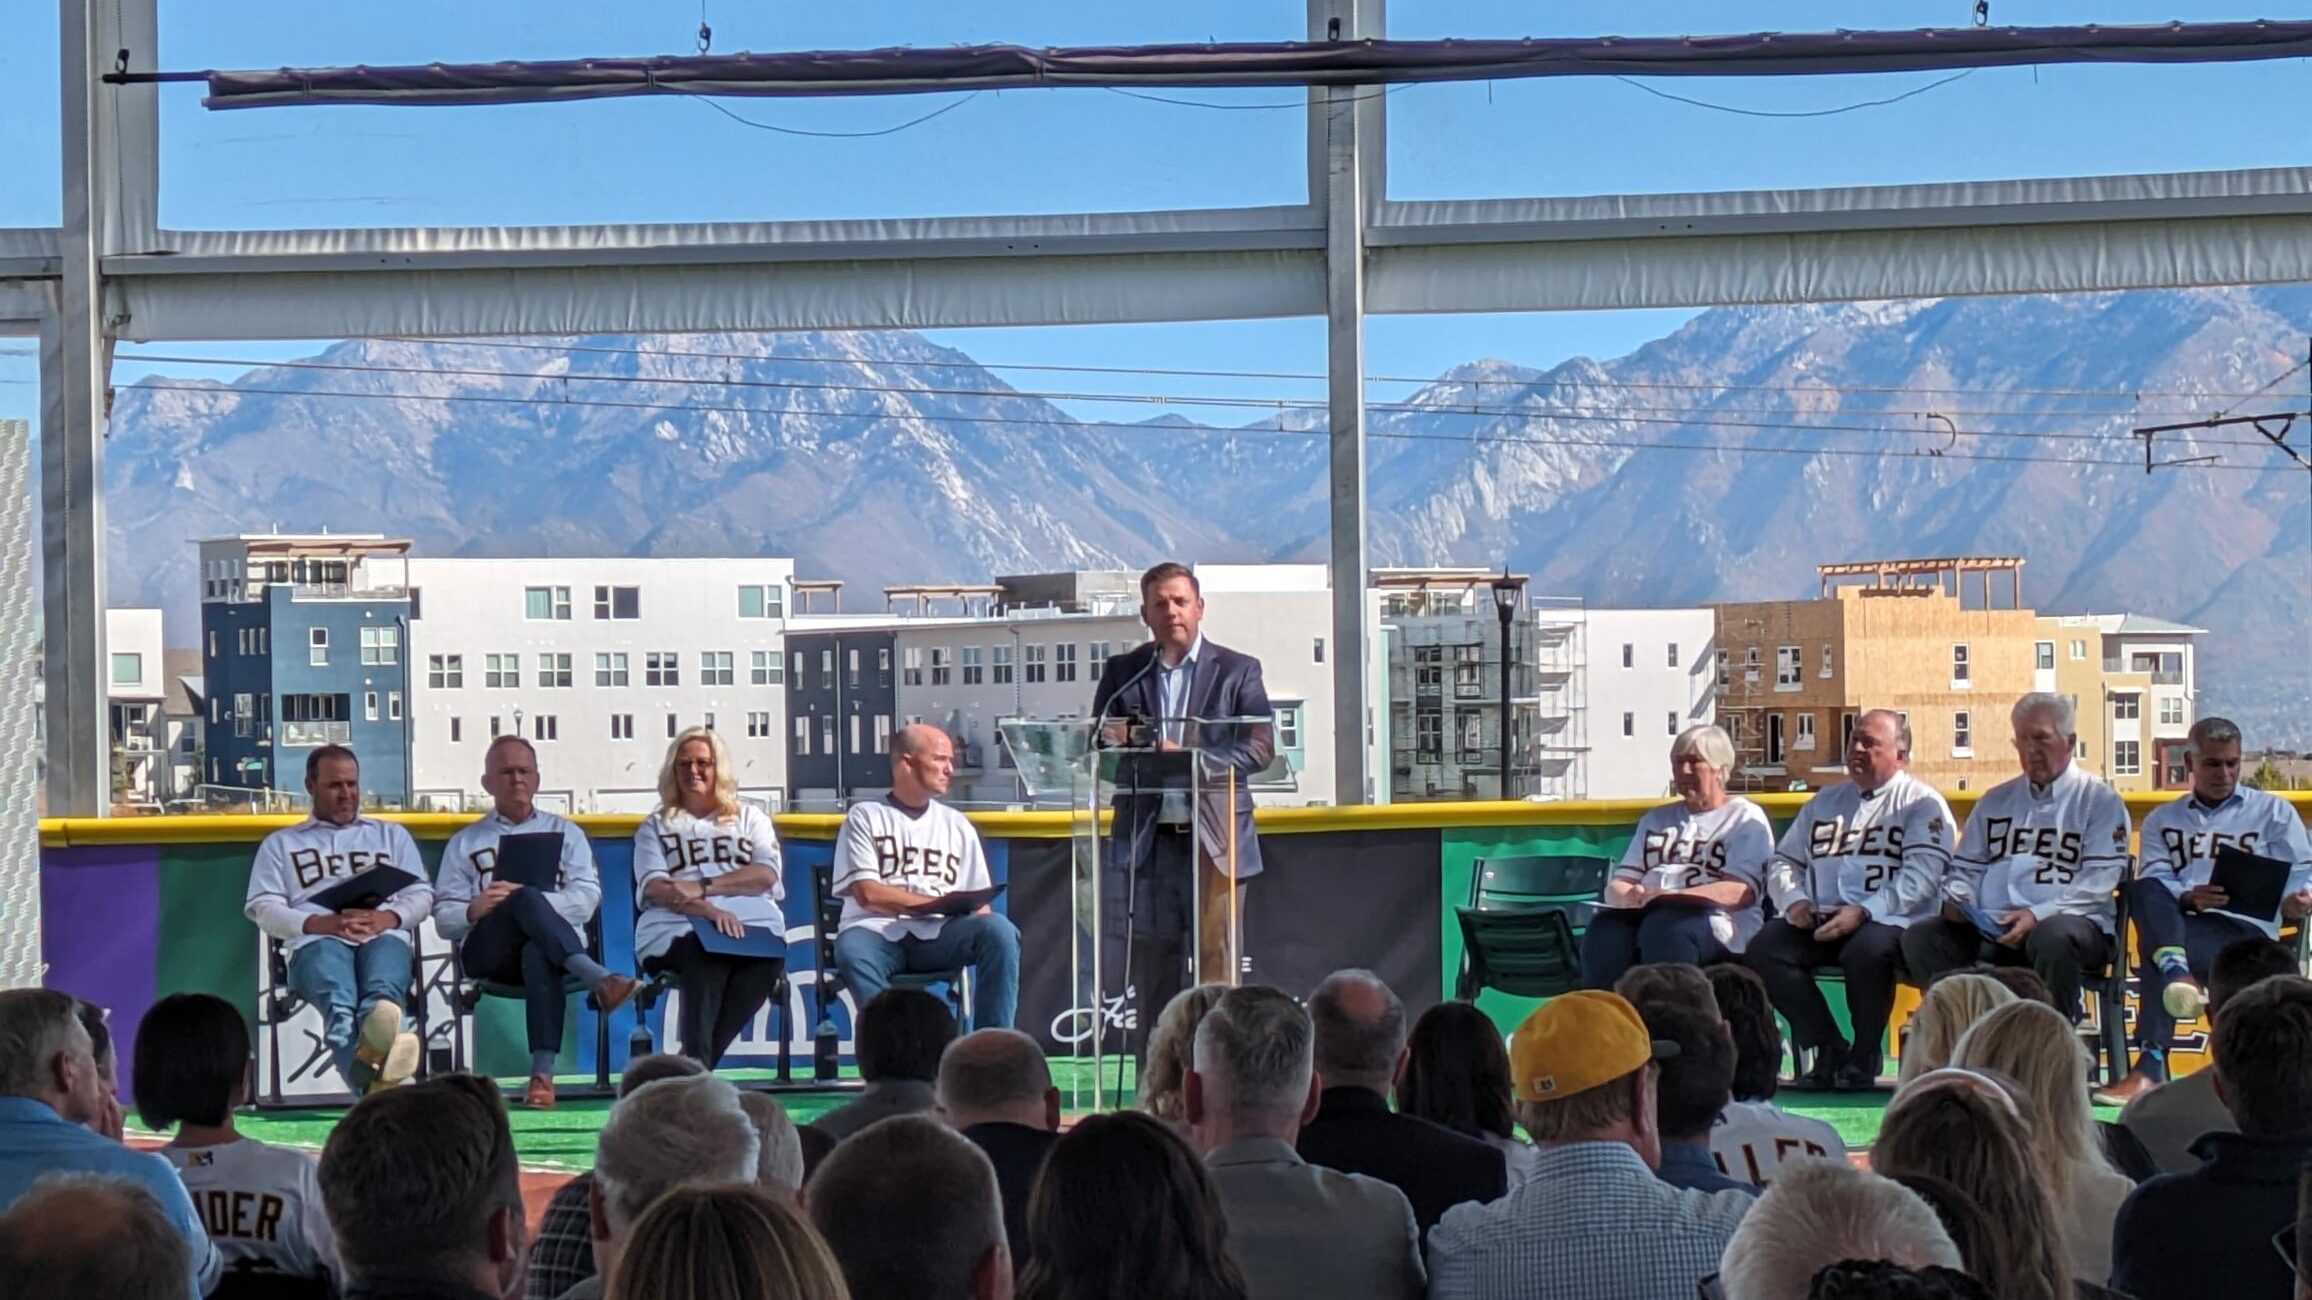 State, city, and legislative leaders joined the Bees owners, the Larry H. Miller Group, for a cerem...